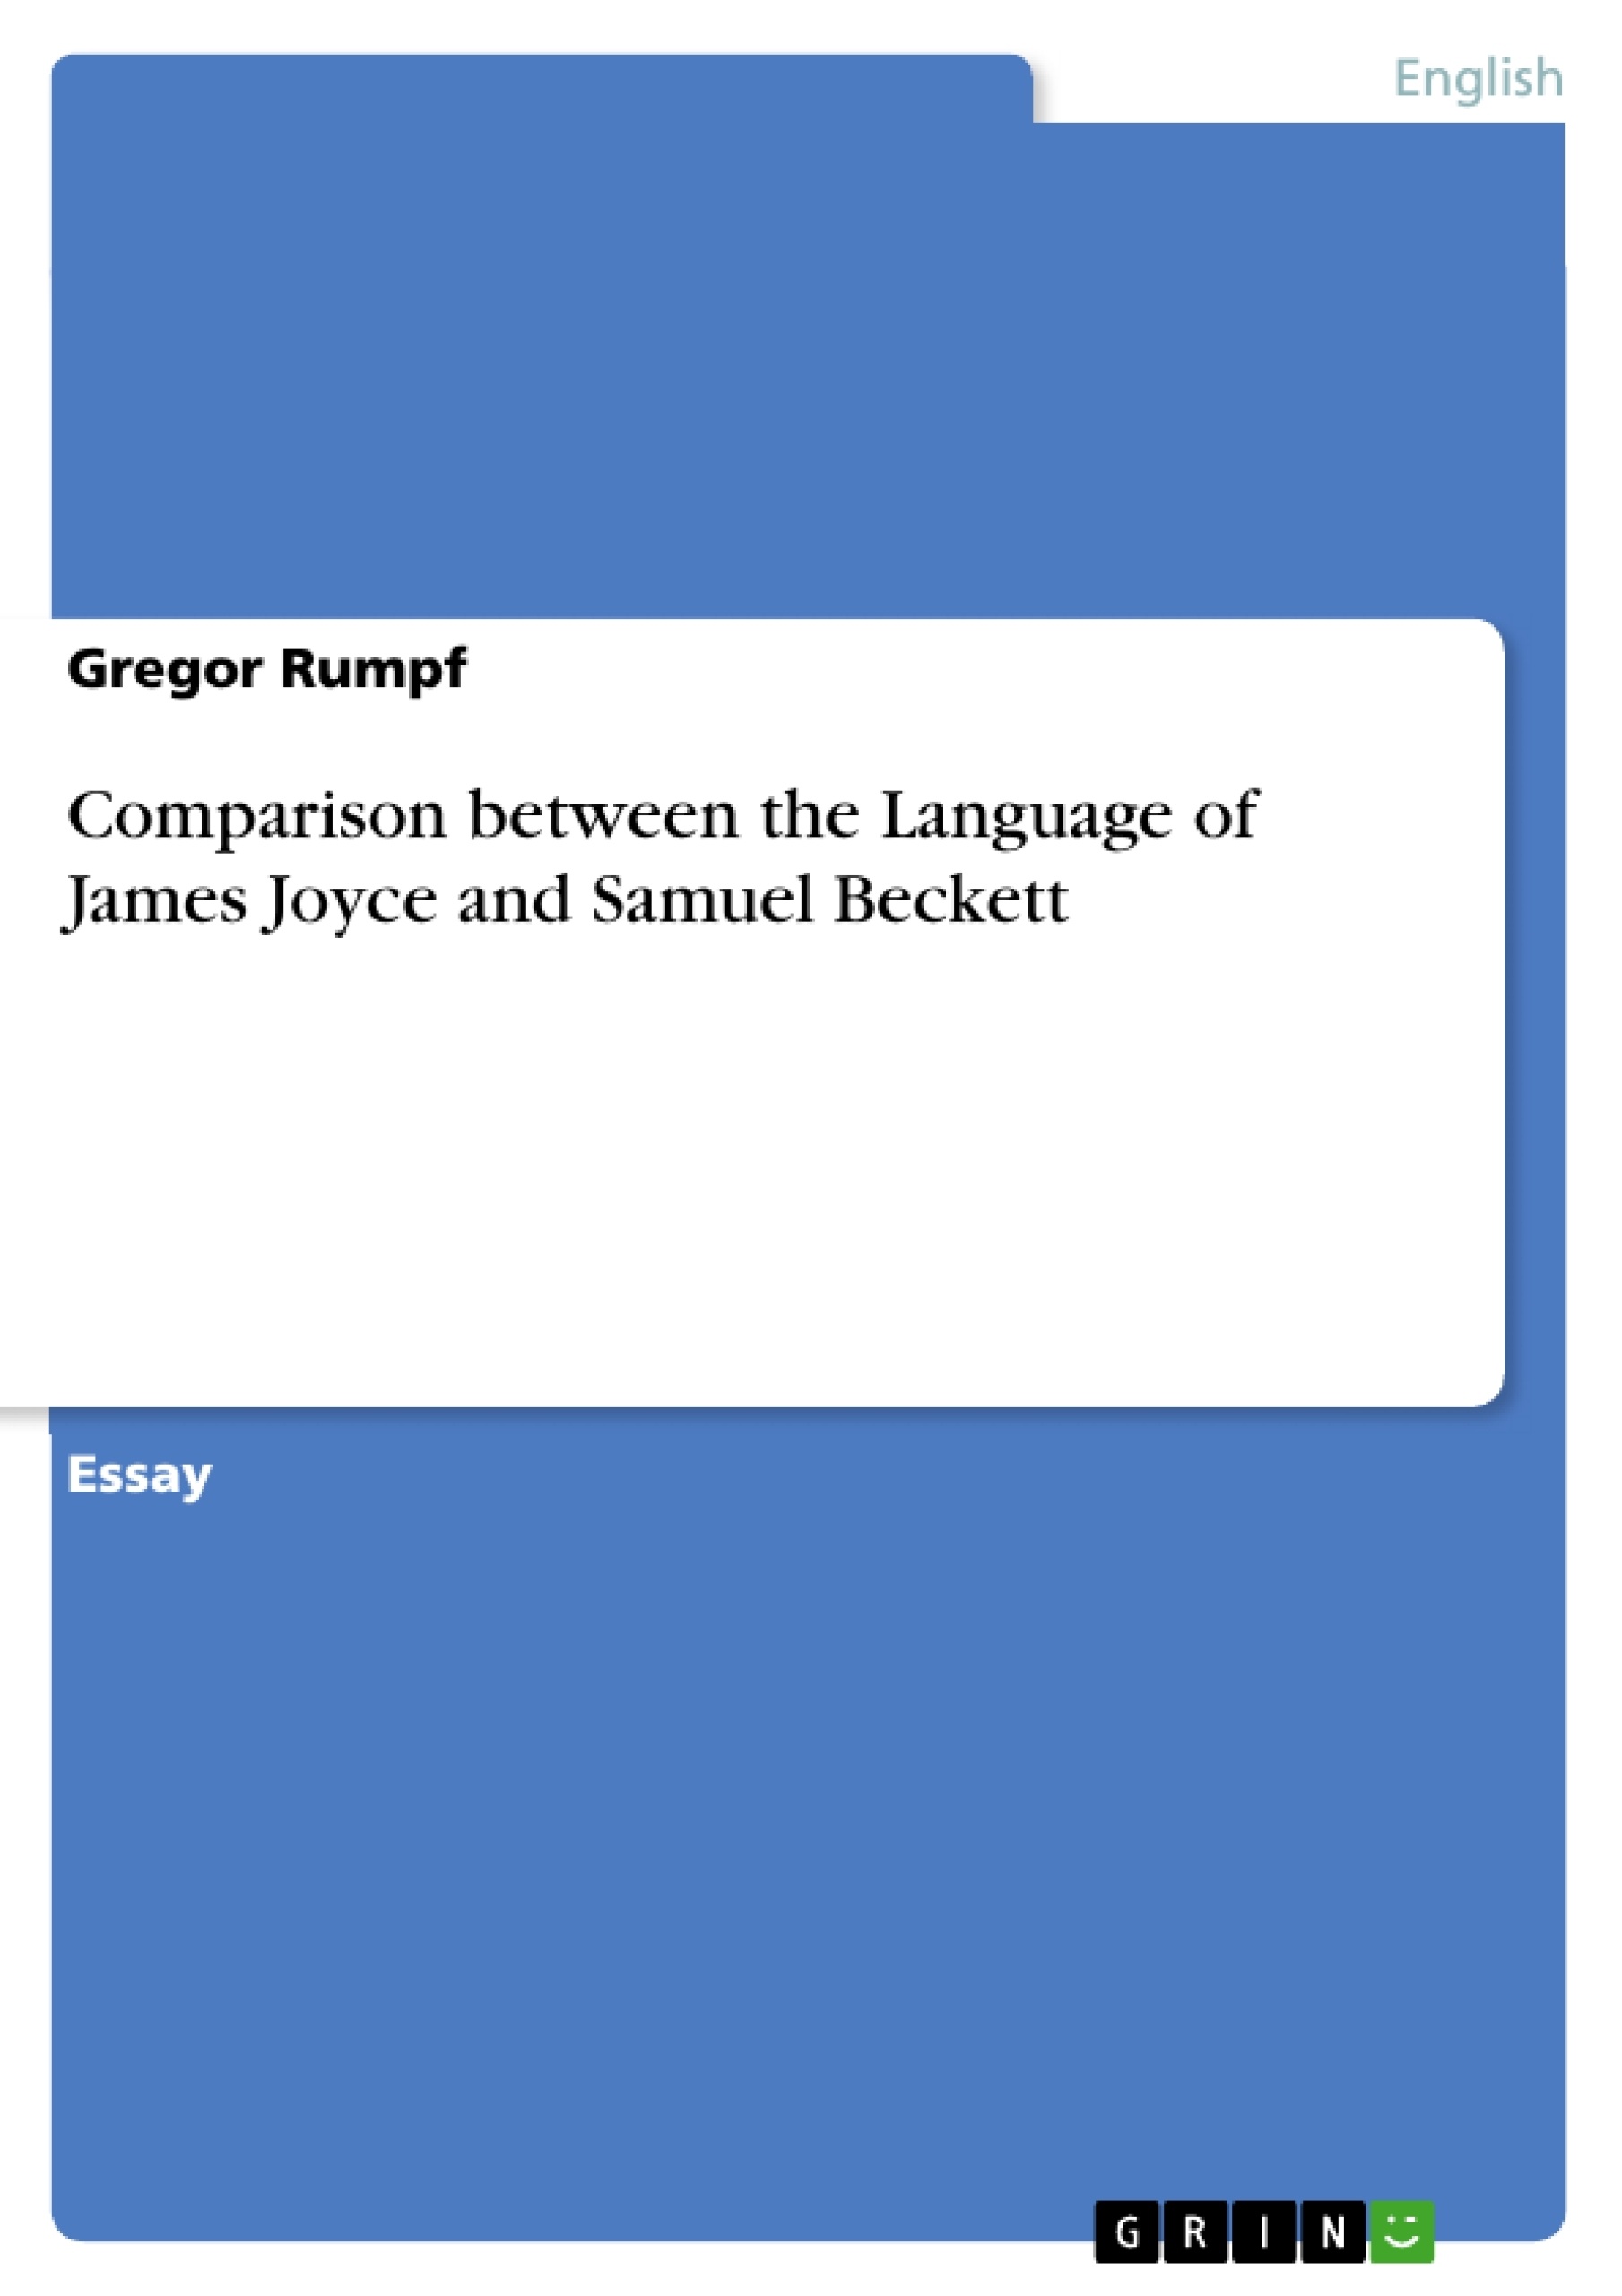 Title: Comparison between the Language of James Joyce and Samuel Beckett